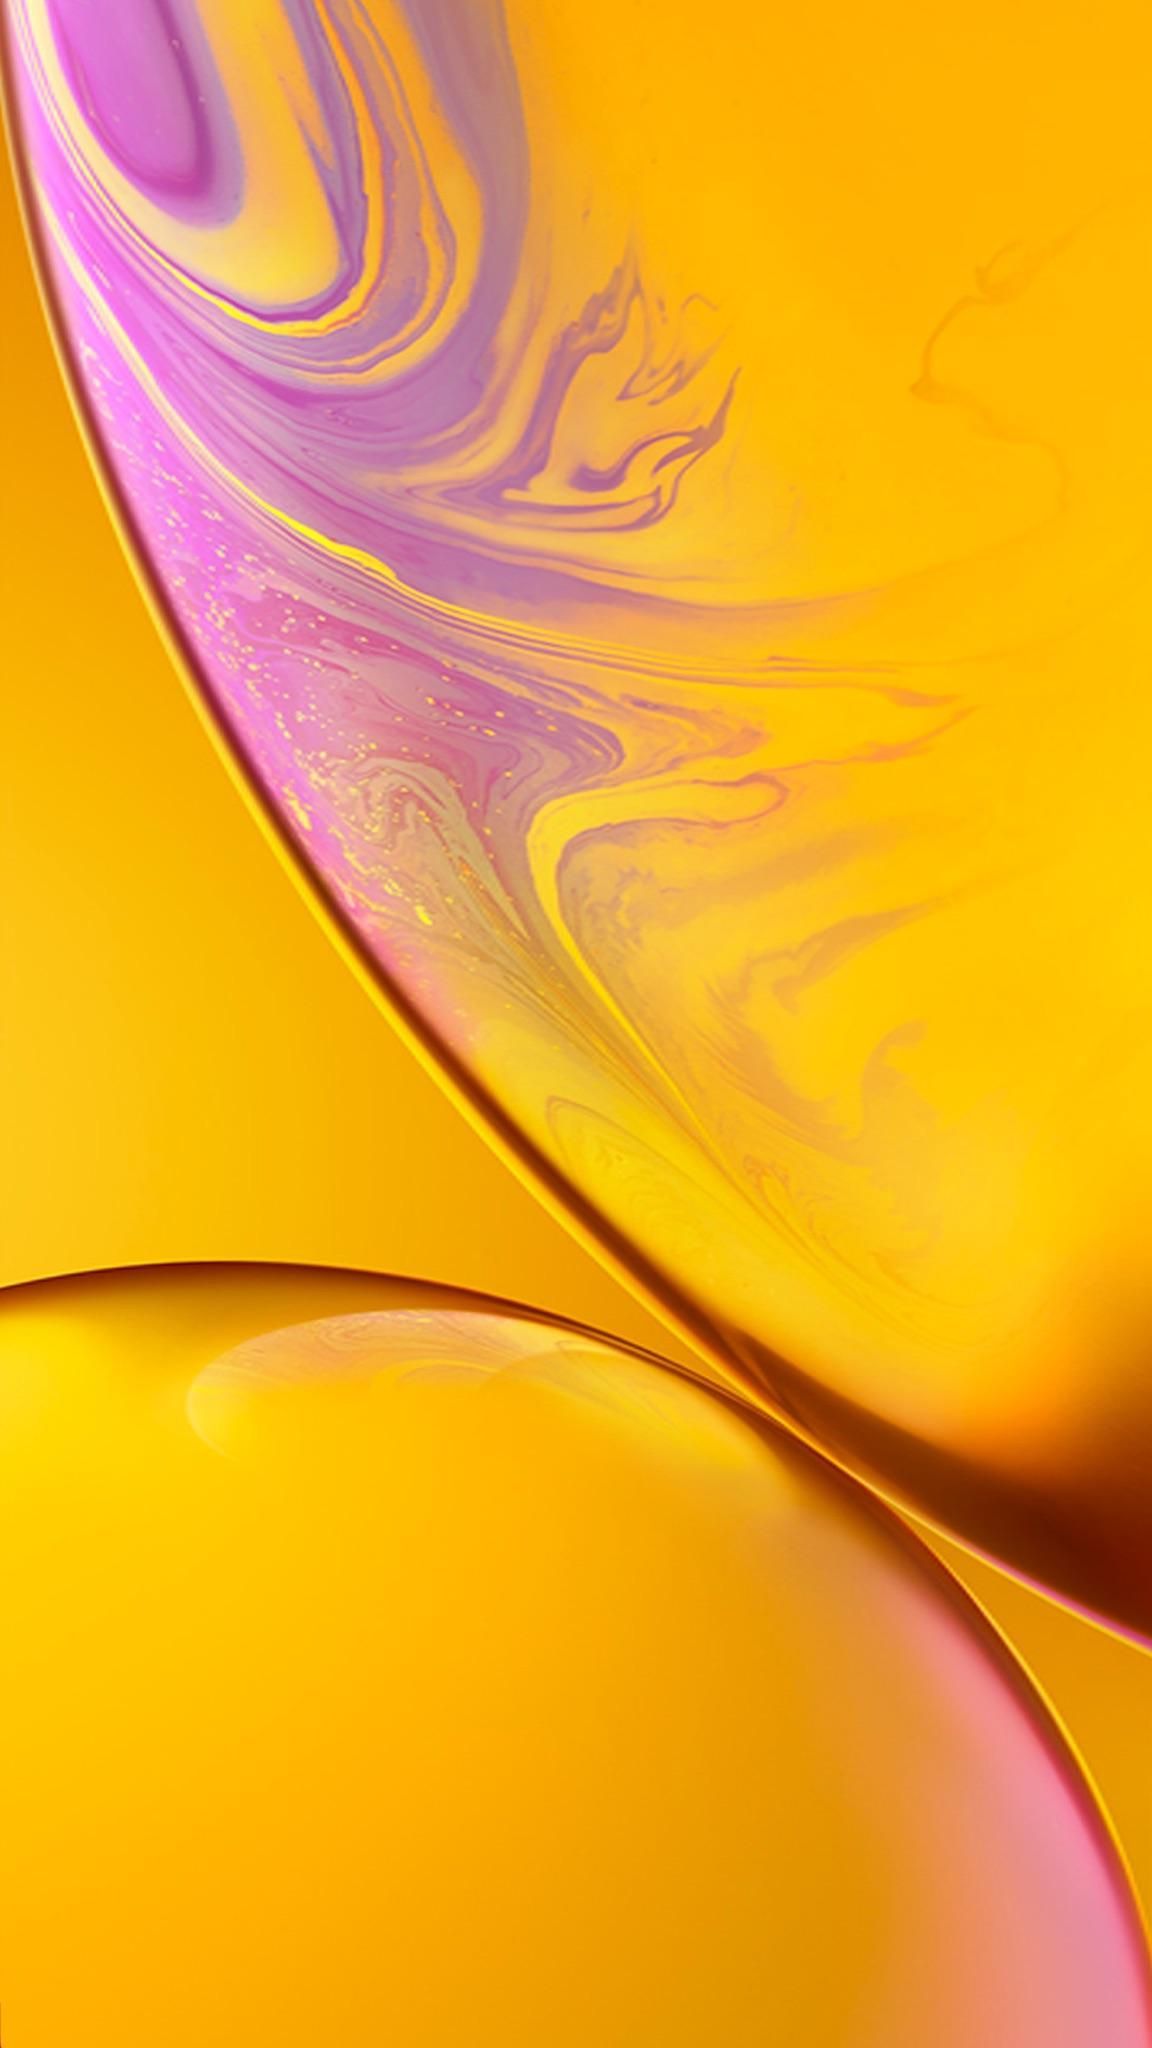 iPhone XR Yellow Wallpaper (notchless). iPhone wallpaper ios, Apple wallpaper iphone, Yellow wallpaper